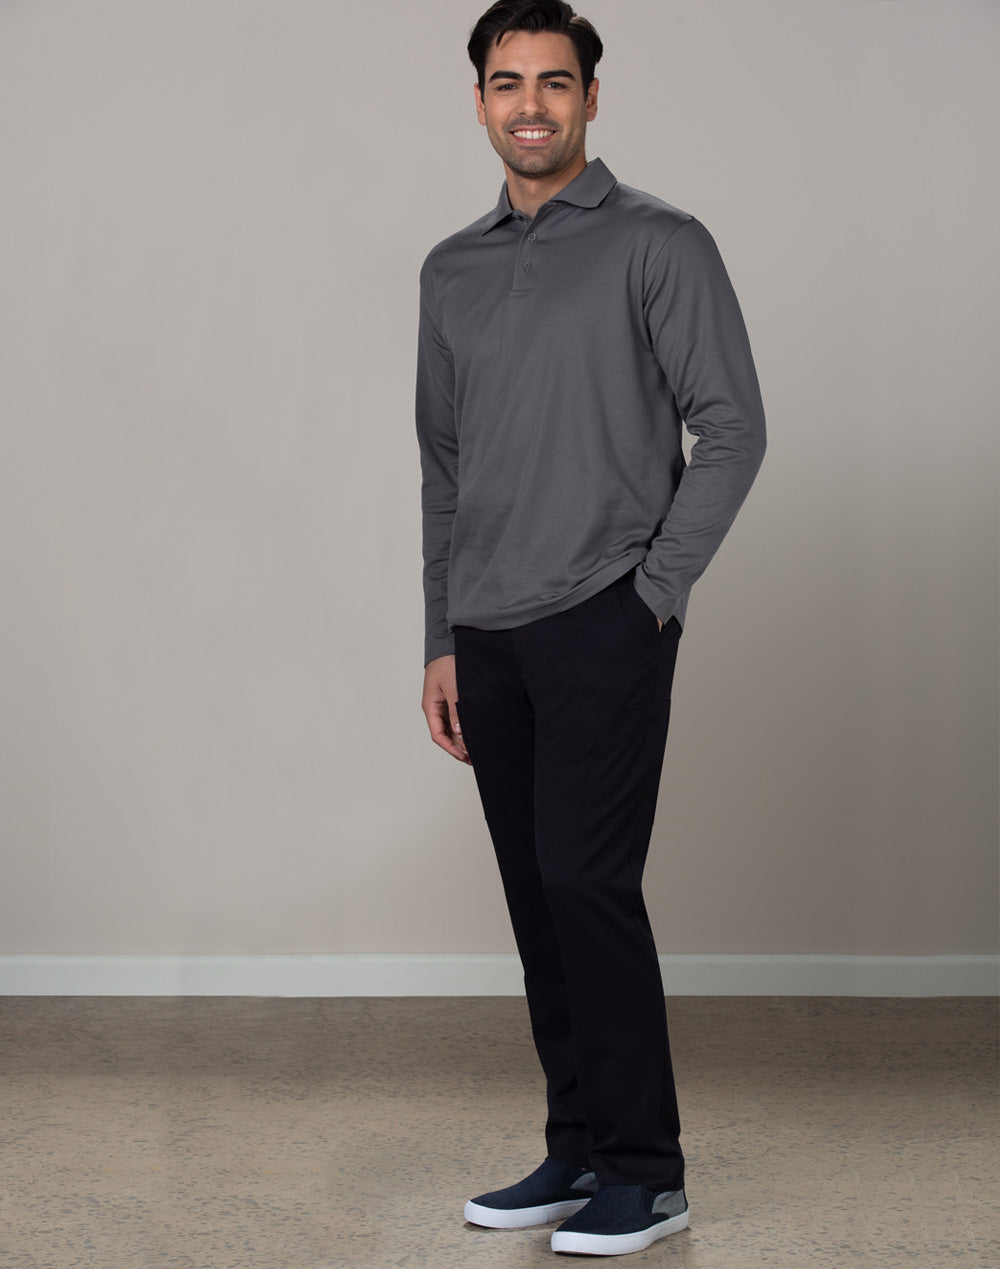 a man in a gray shirt and black pants